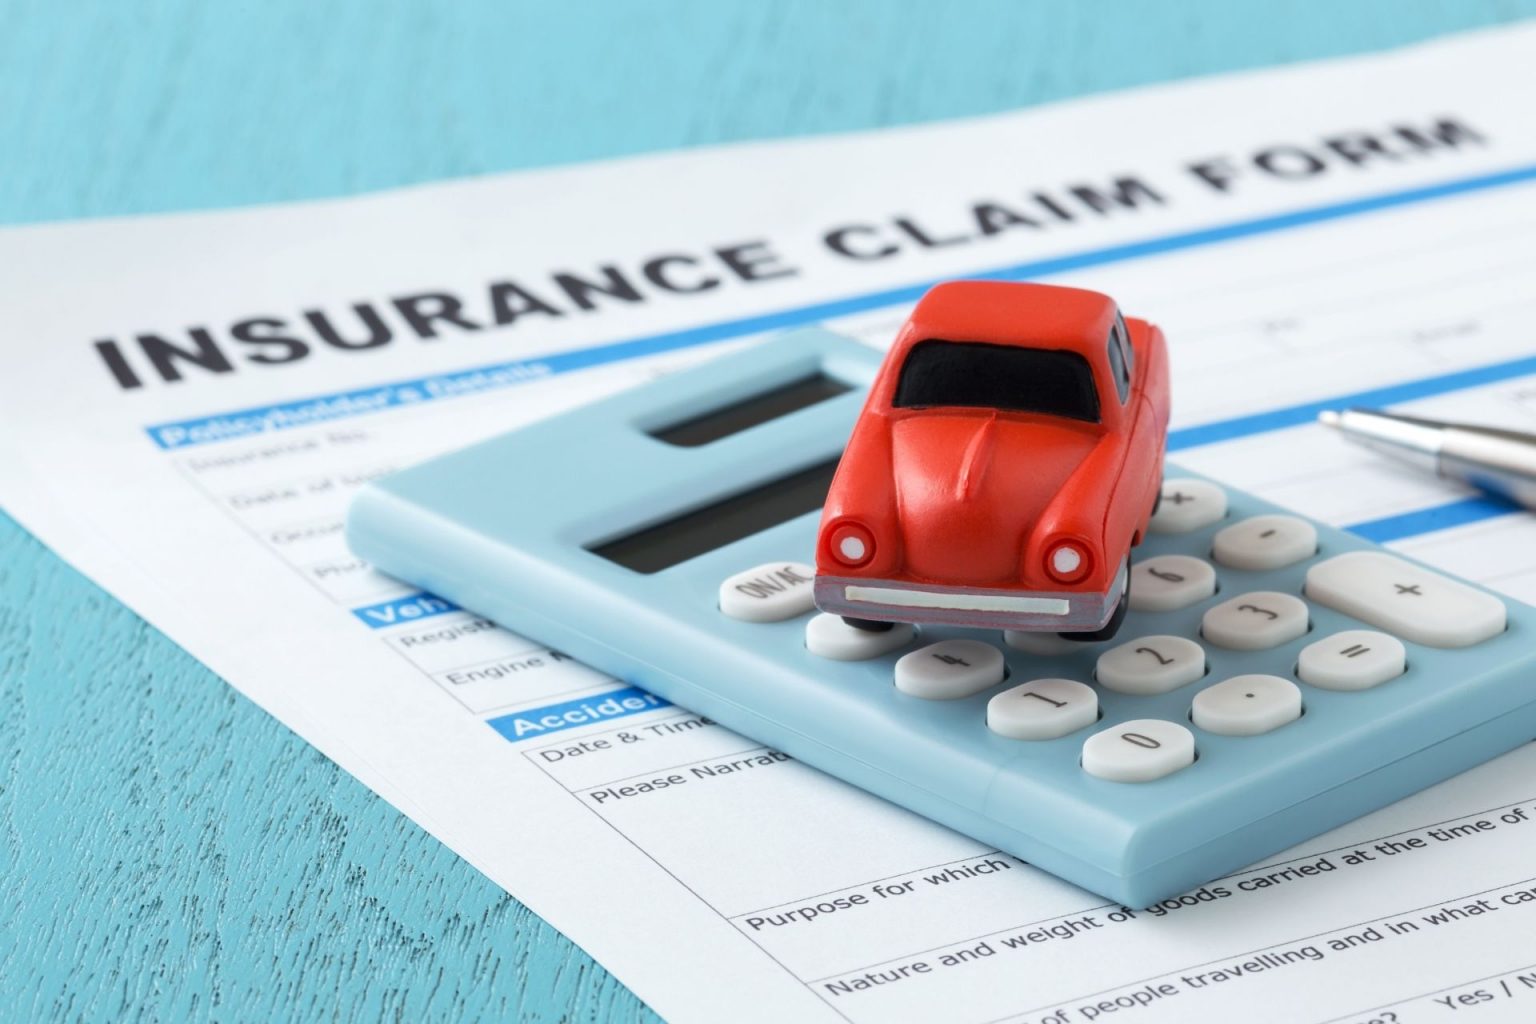 What causes car insurance to go up?